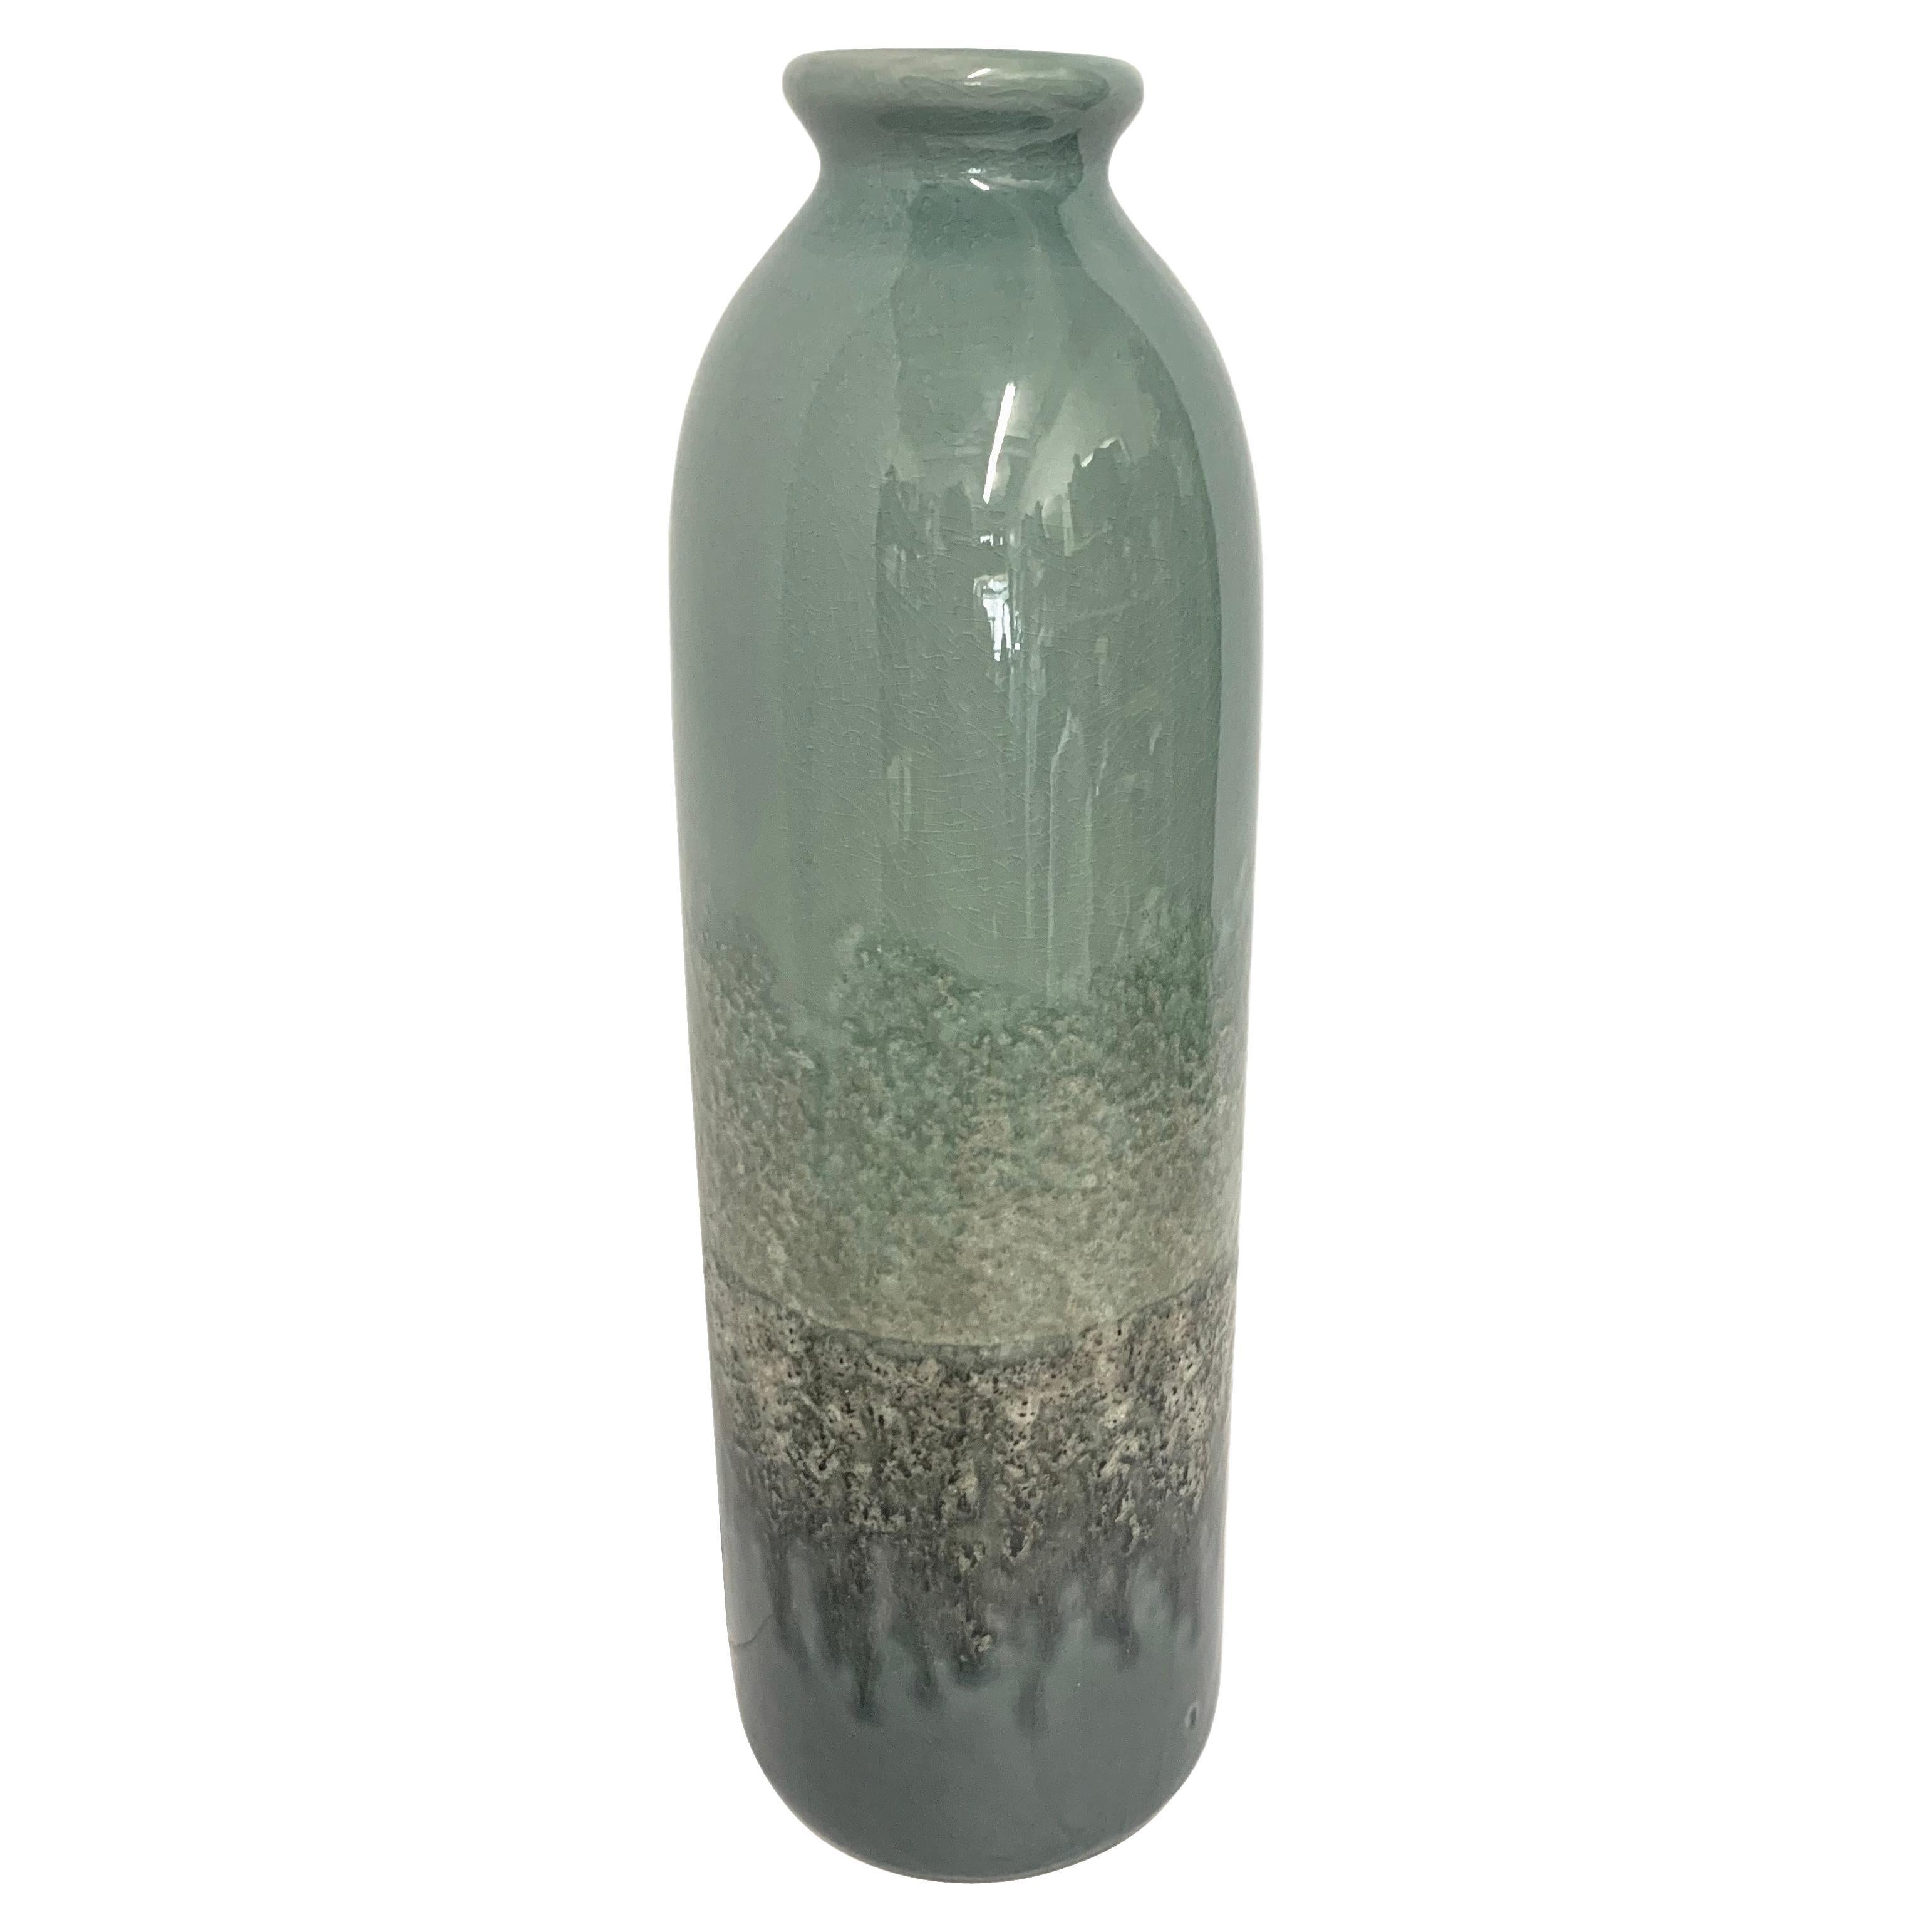 Turquoise Tall Column Shaped Vase, China, Contemporary